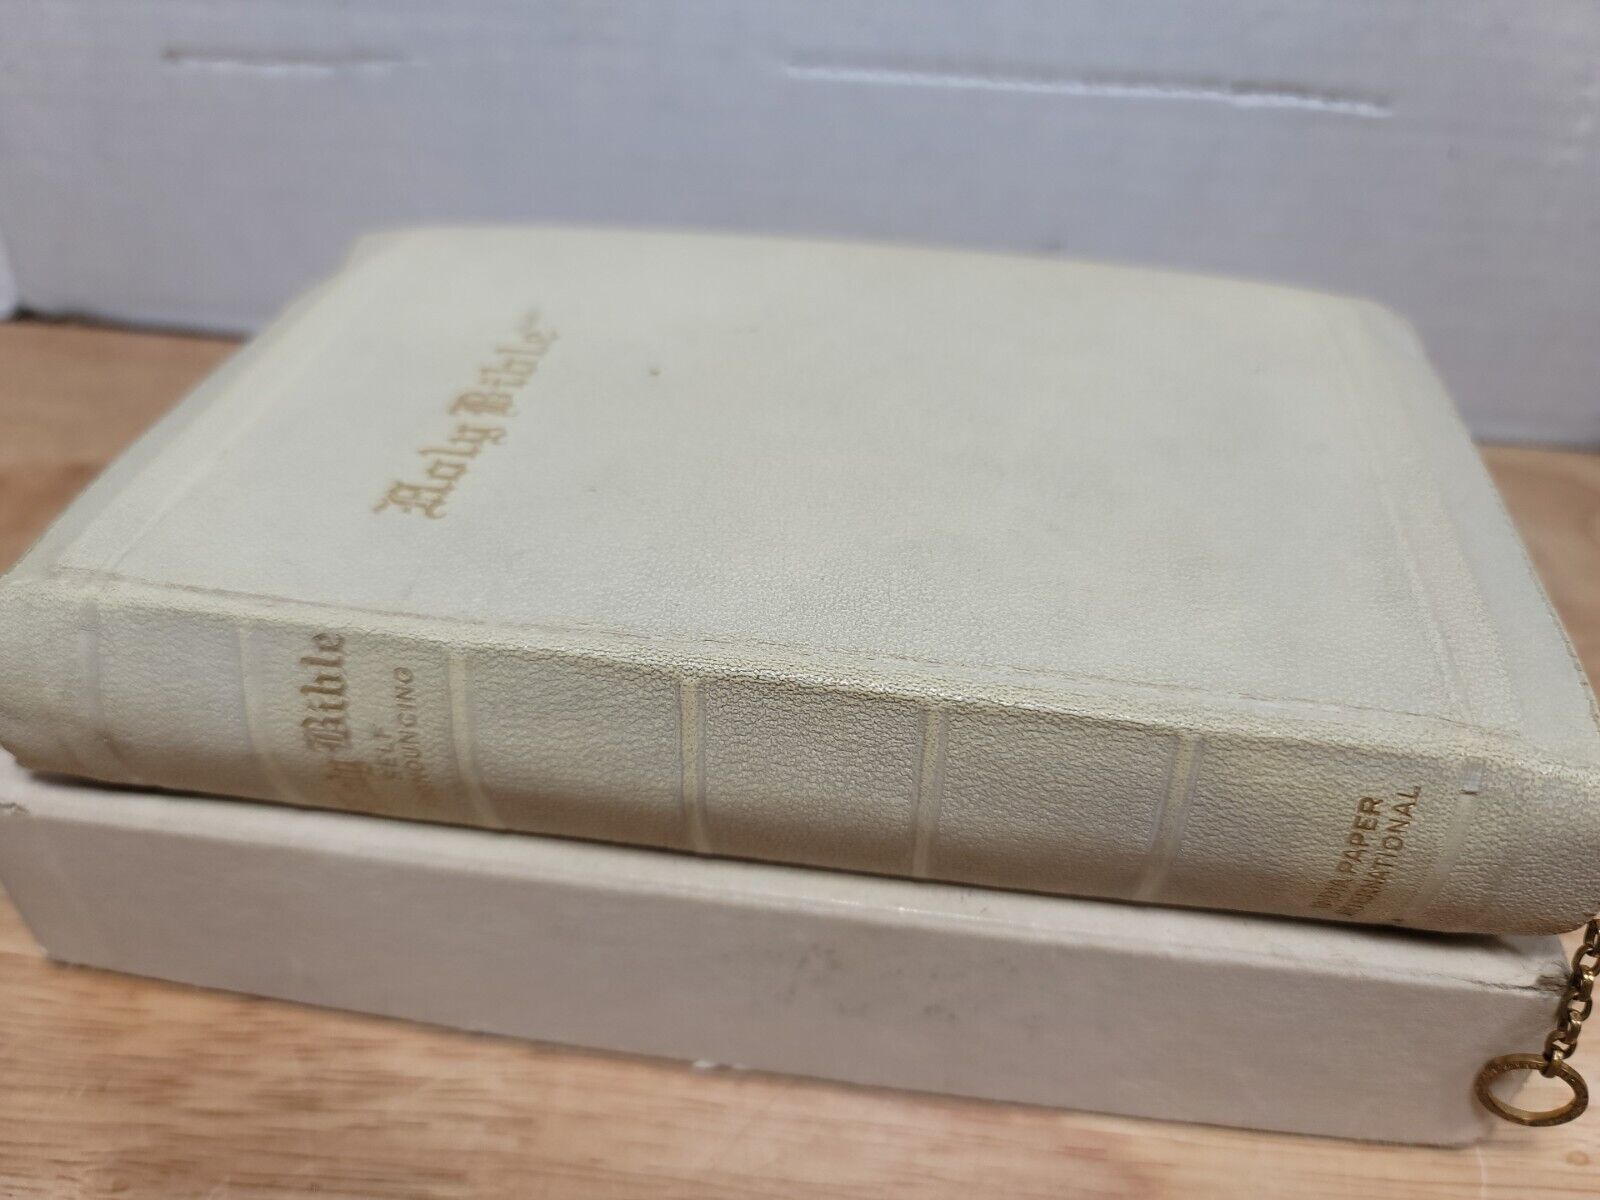 VINTAGE HOLY BIBLE ILLUSTRATED SELF-PRONOUNCING EDITION KJV WHITE ZIPPERED CASE 